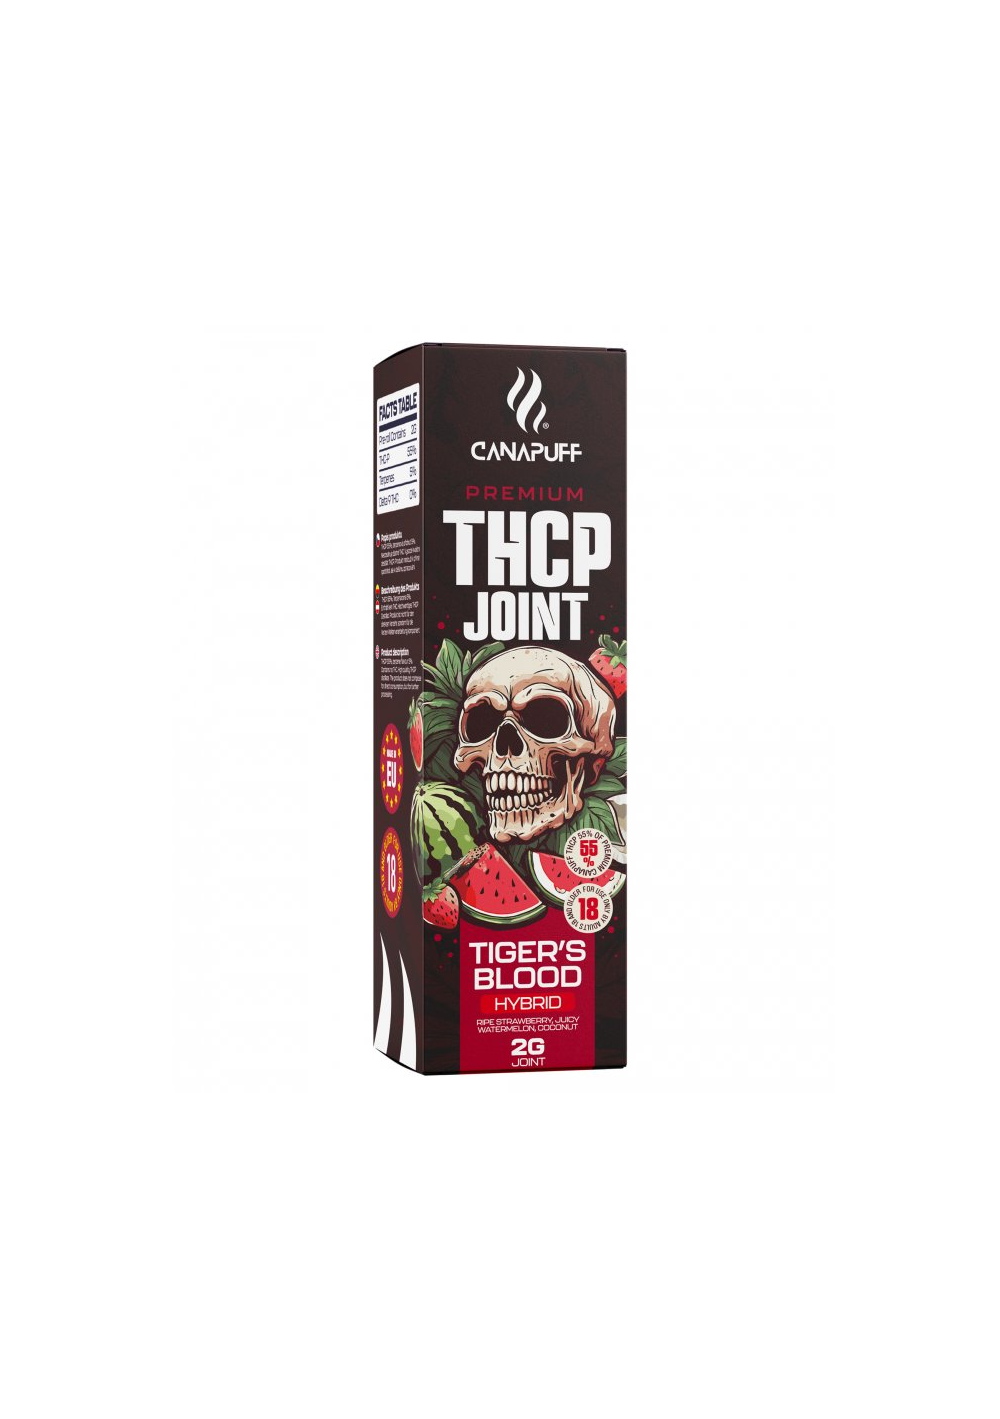 THC-P Pre Roll 55% - Tiger's Blood, 2g - CanaPuff